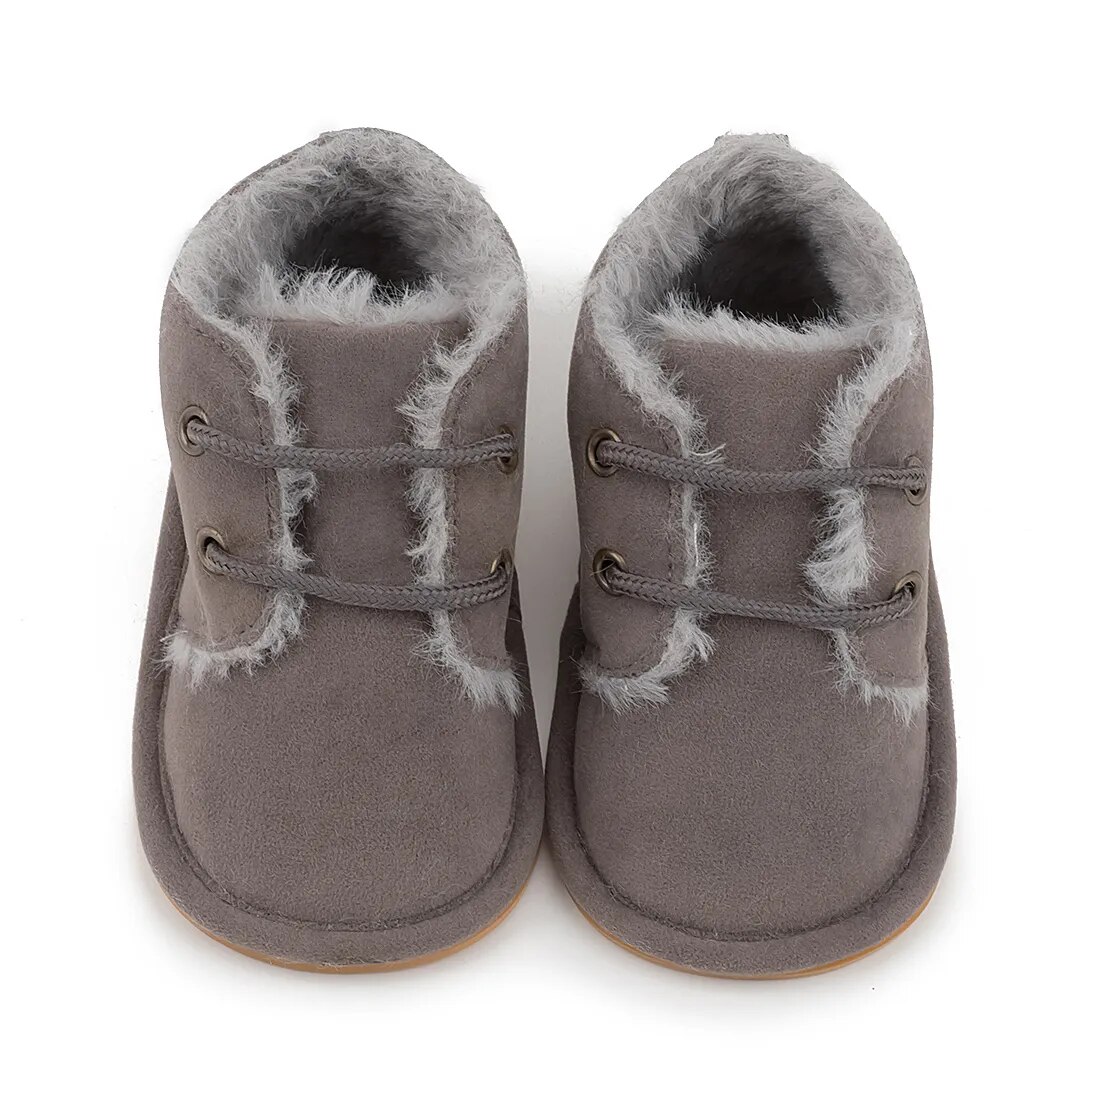 Baby Shoes Winter Snow Booties Warm Infant Boy Girl Toddler Crib Shoes Rubber Sole Anti-slip Soft Newborn First Walkers